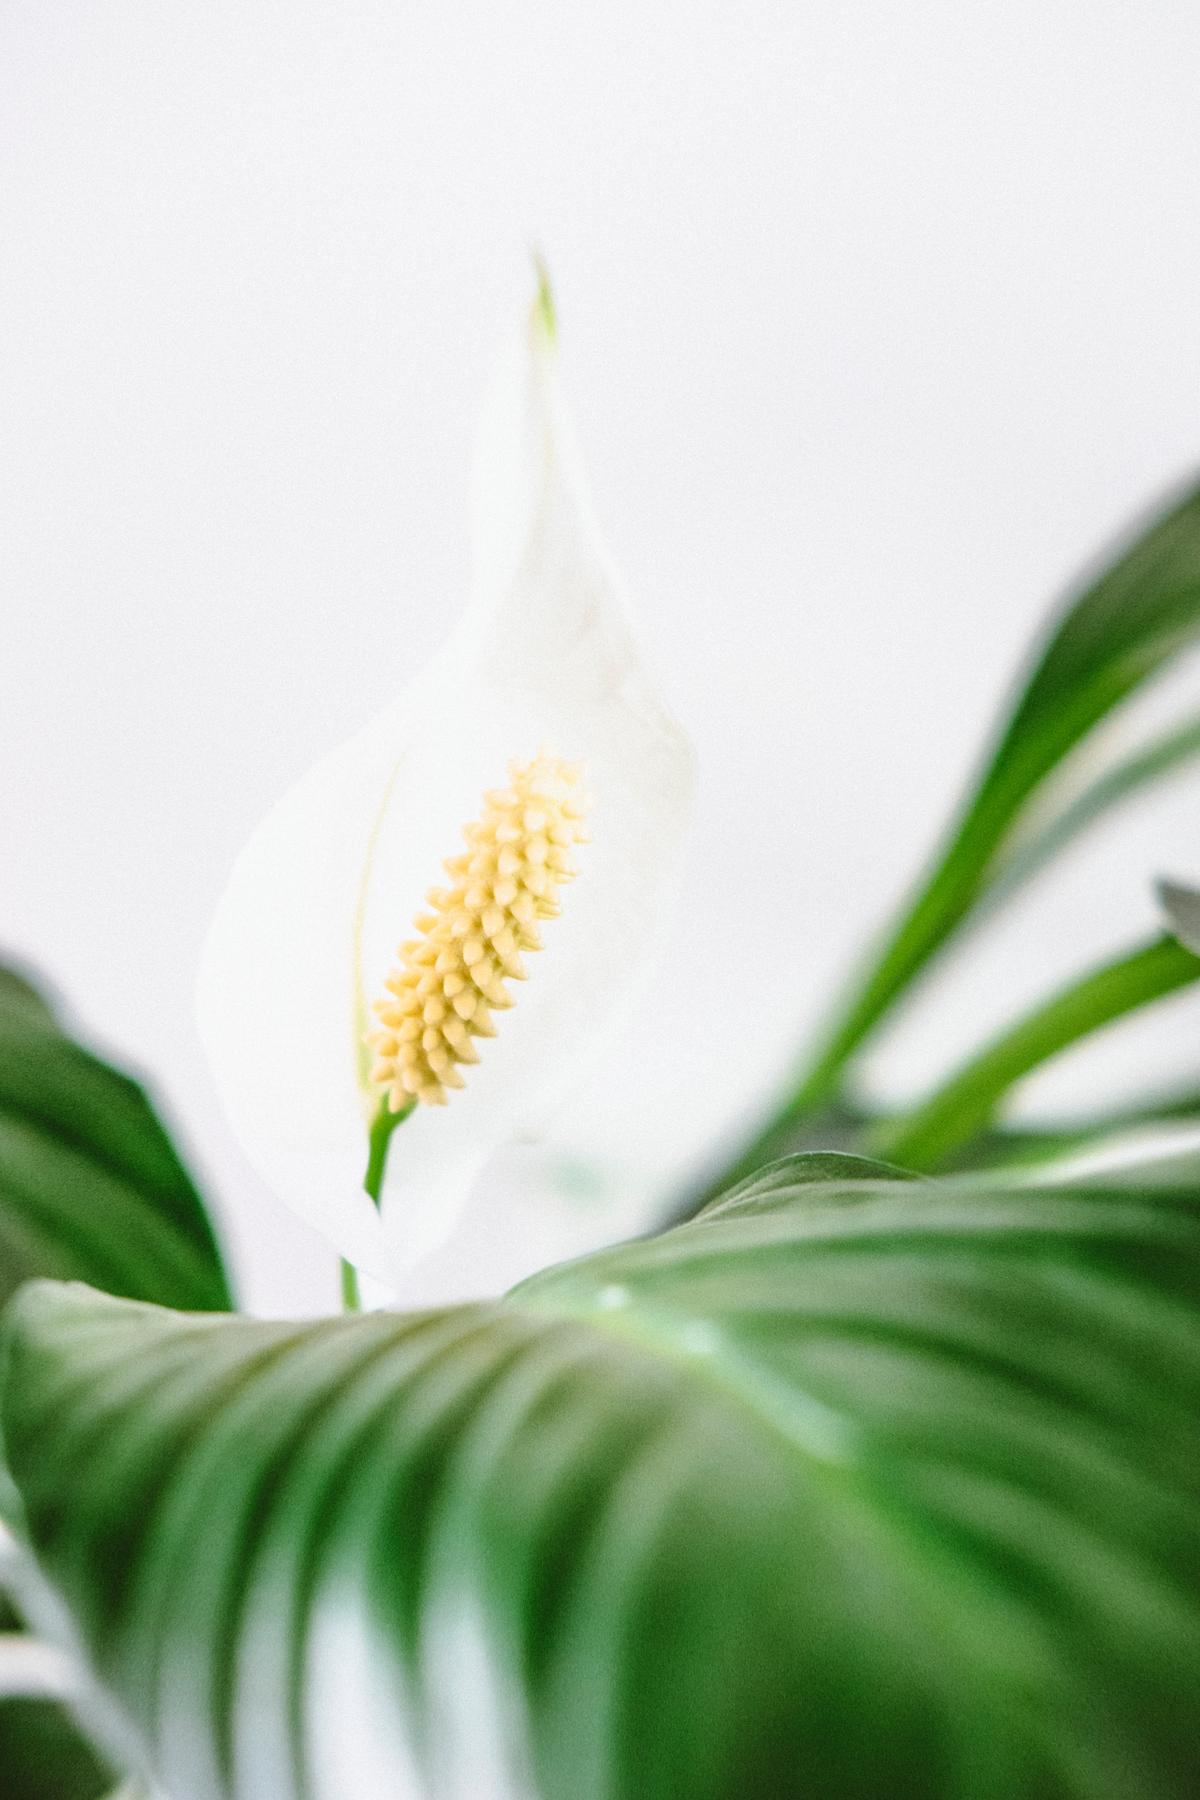 A peace lily plant with white flowers and green leaves